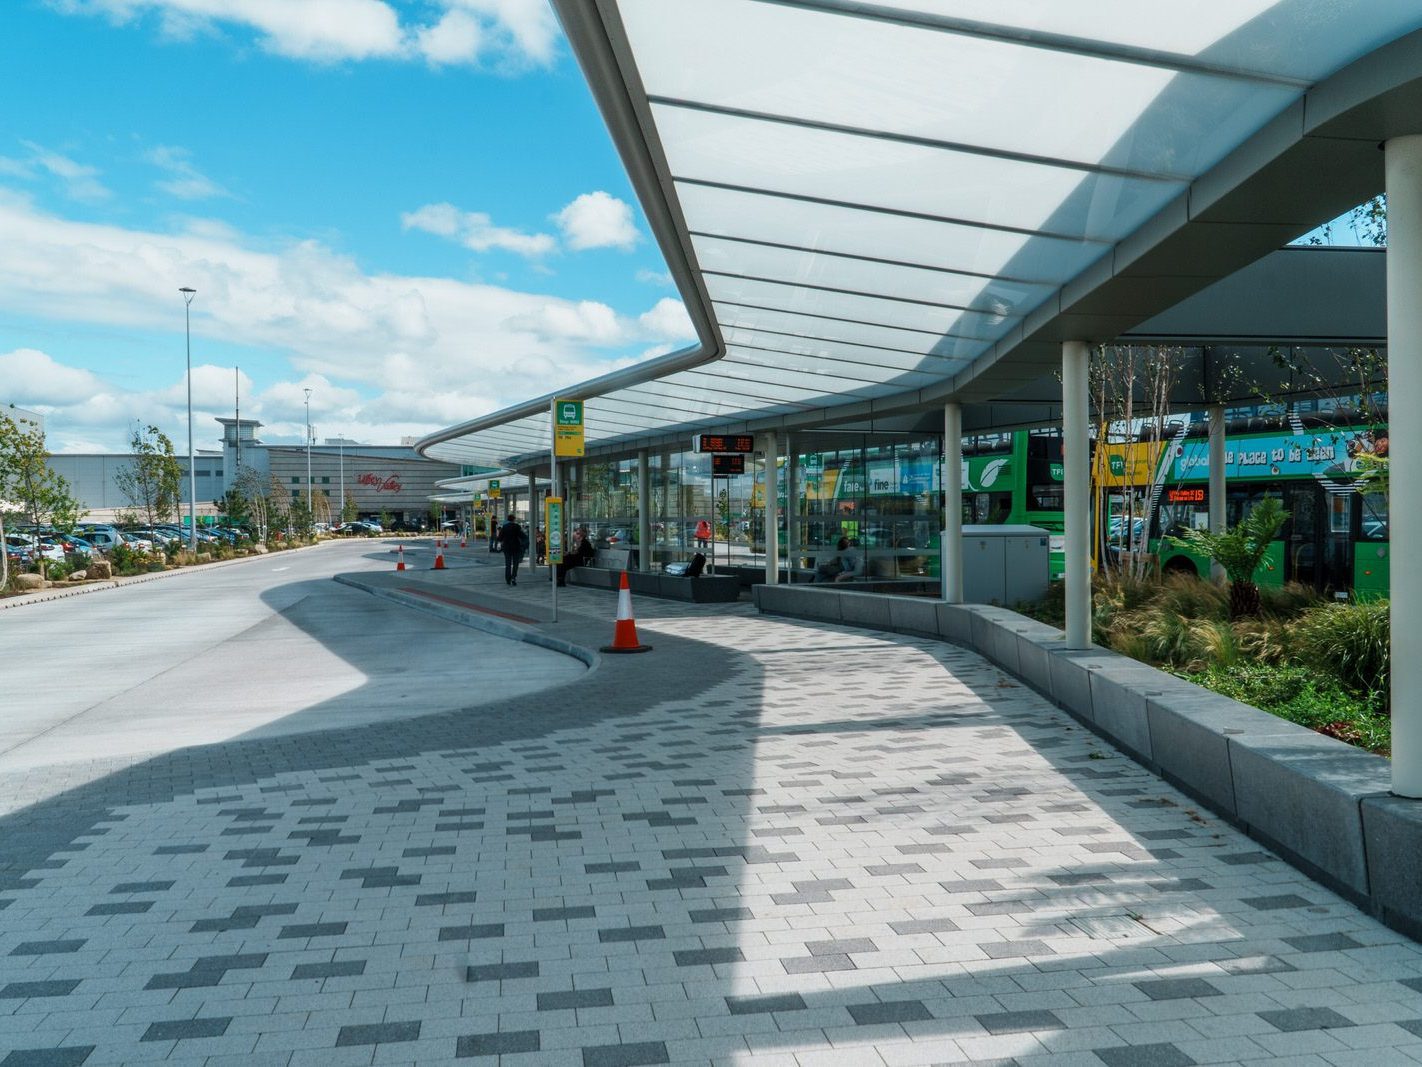 THE NEW BUS PLAZA THAT I DID NOT KNOW ABOUT [AT LIFFEY VALLEY SHOPPING CENTRE] 002